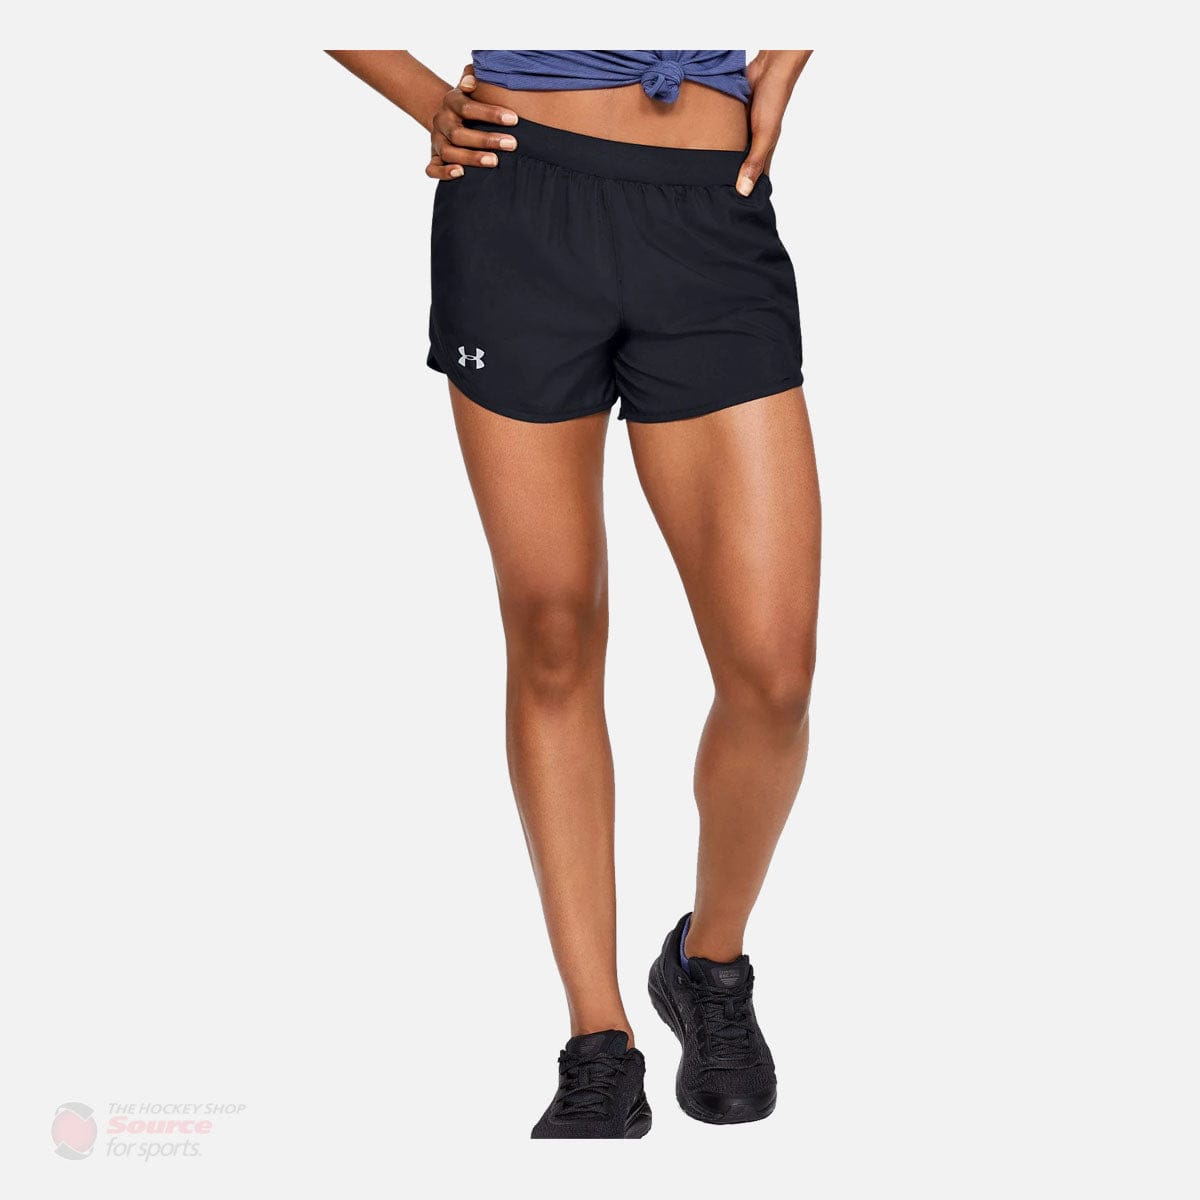 Under Armour Fly-By 2.0 Womens Shorts